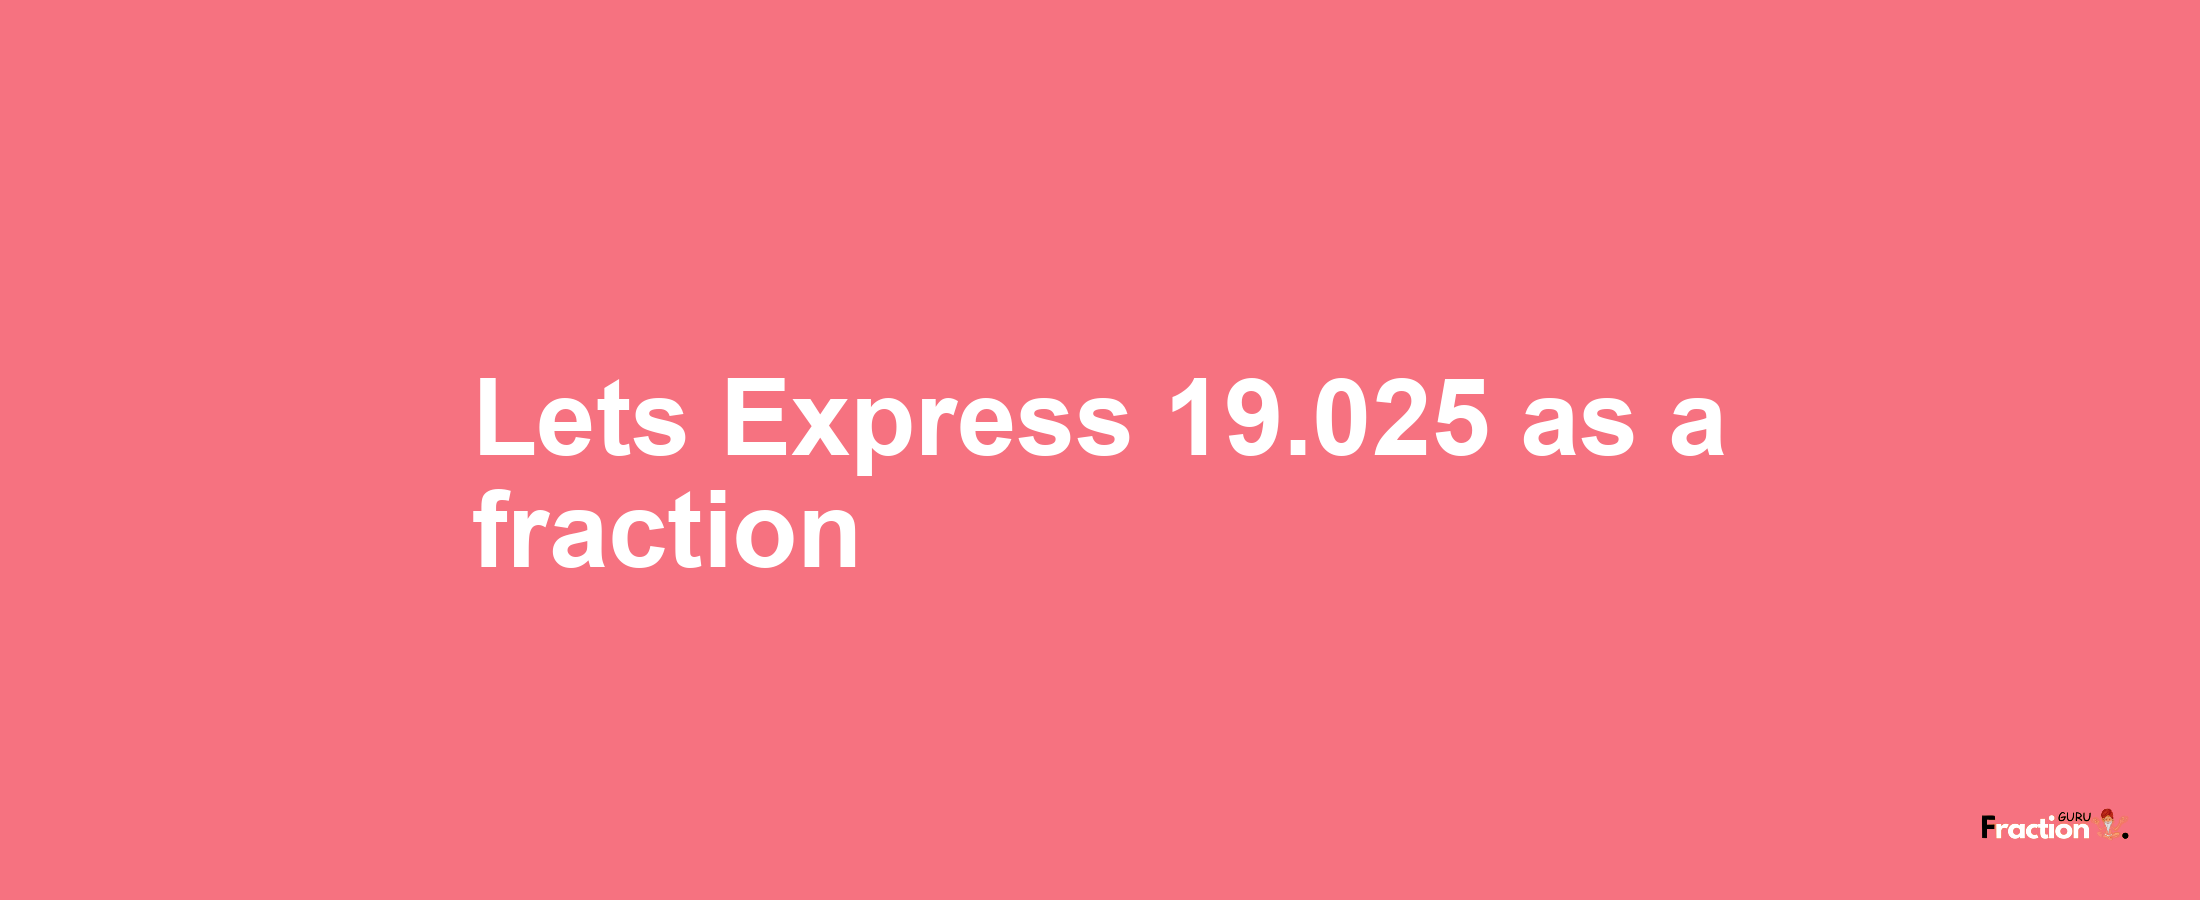 Lets Express 19.025 as afraction